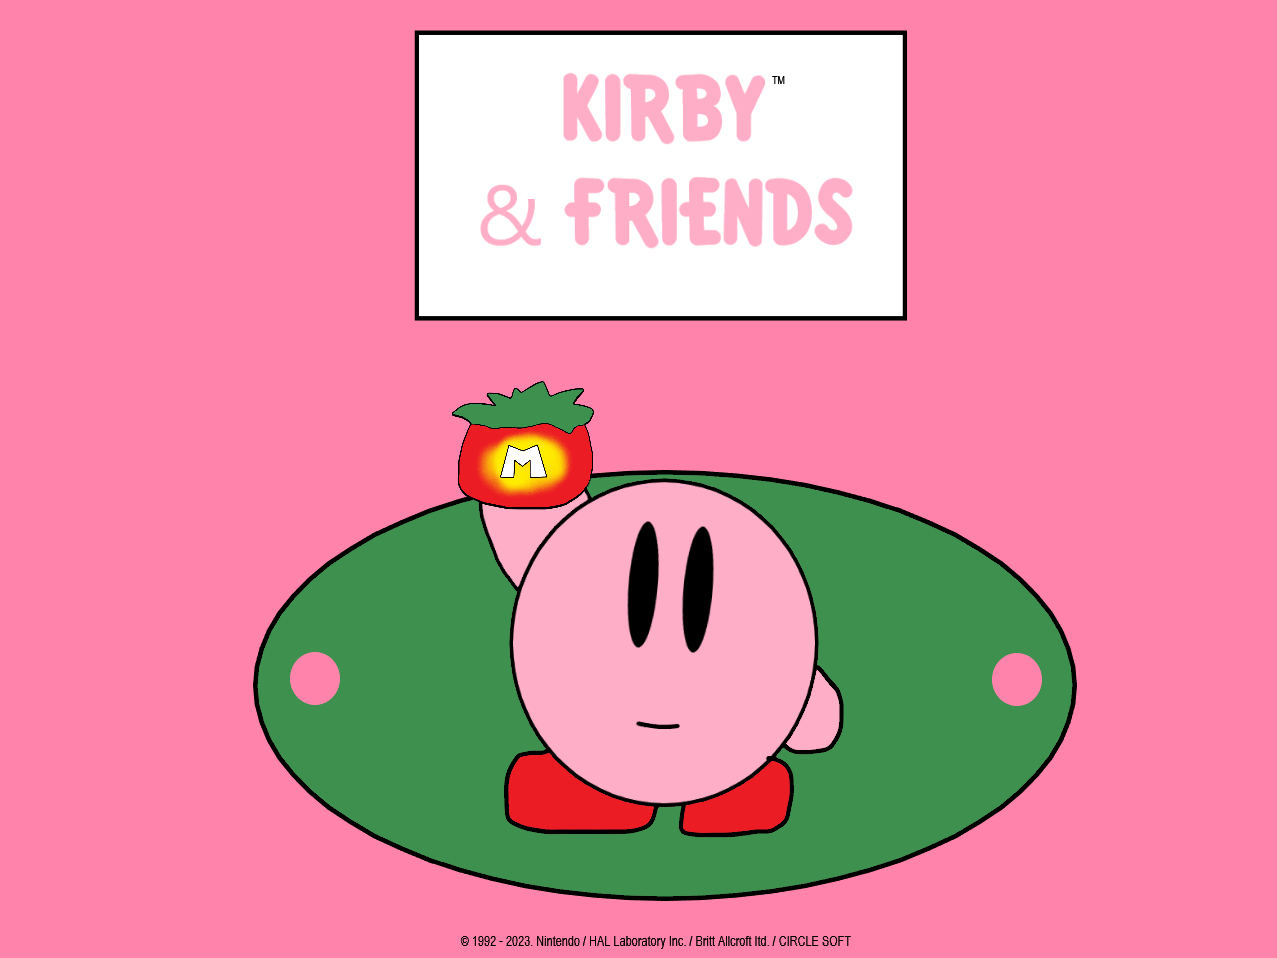 Kirby and Friends artwork